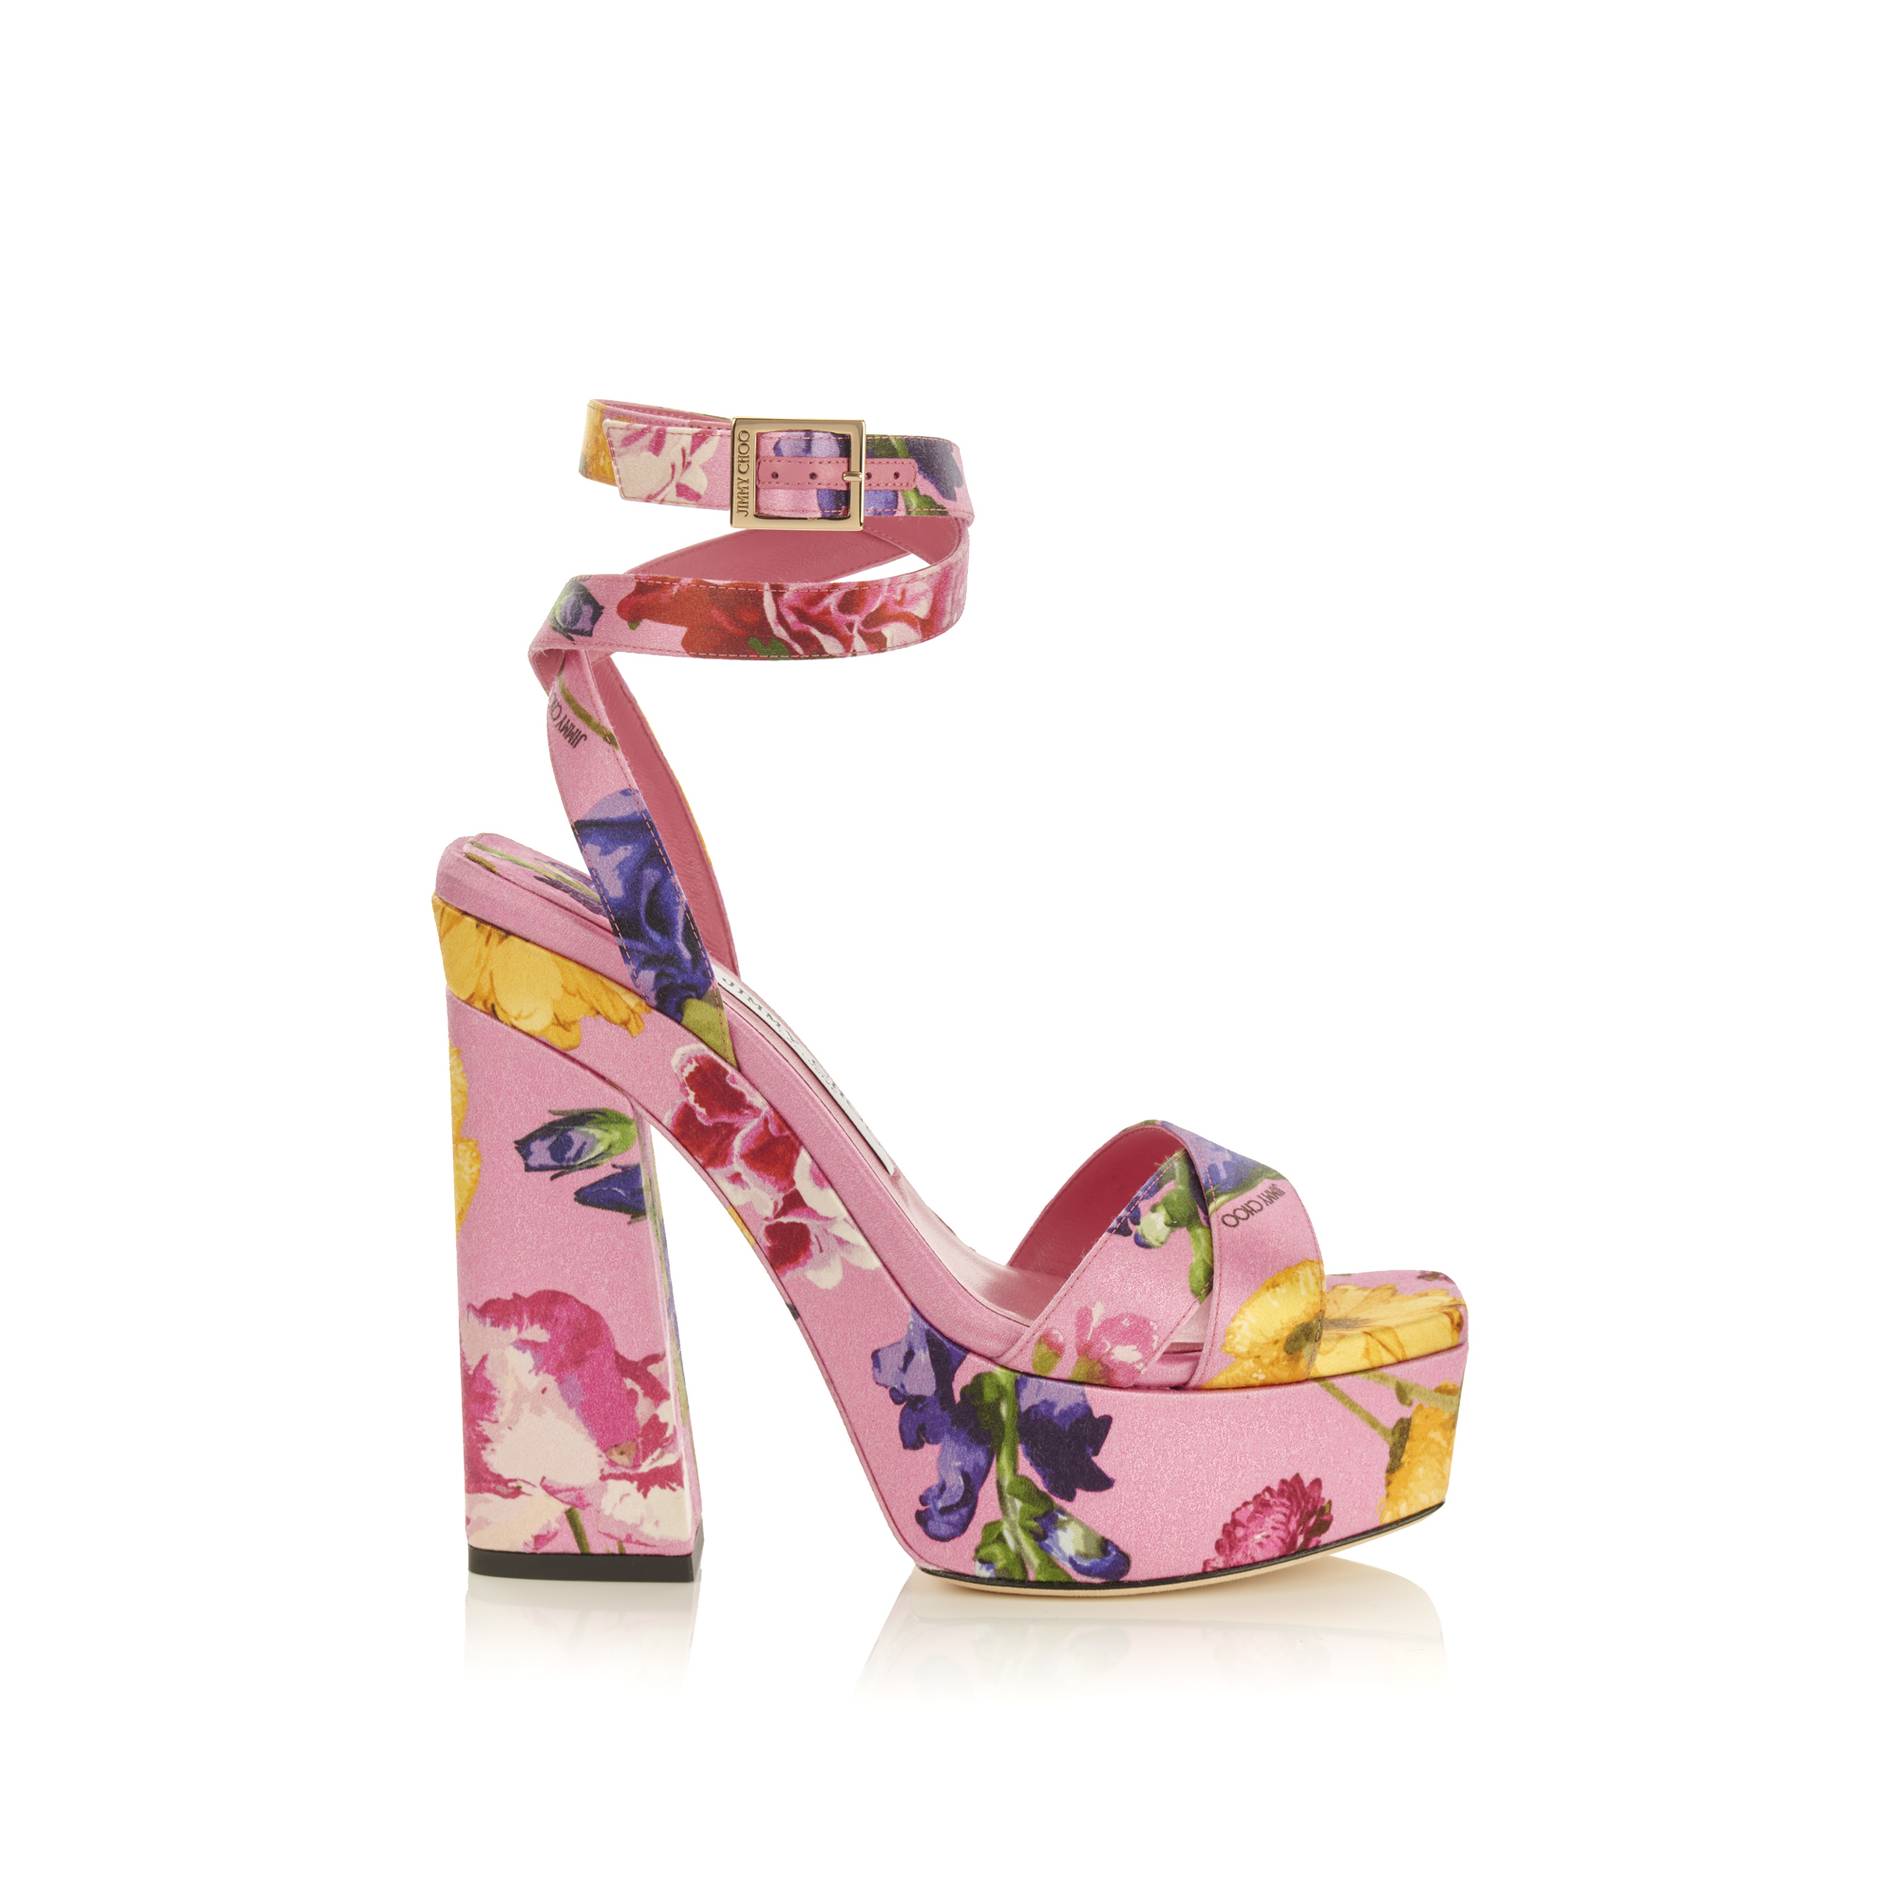 Jimmy Choo, Neiman Marcus Reveal Exclusive Collab